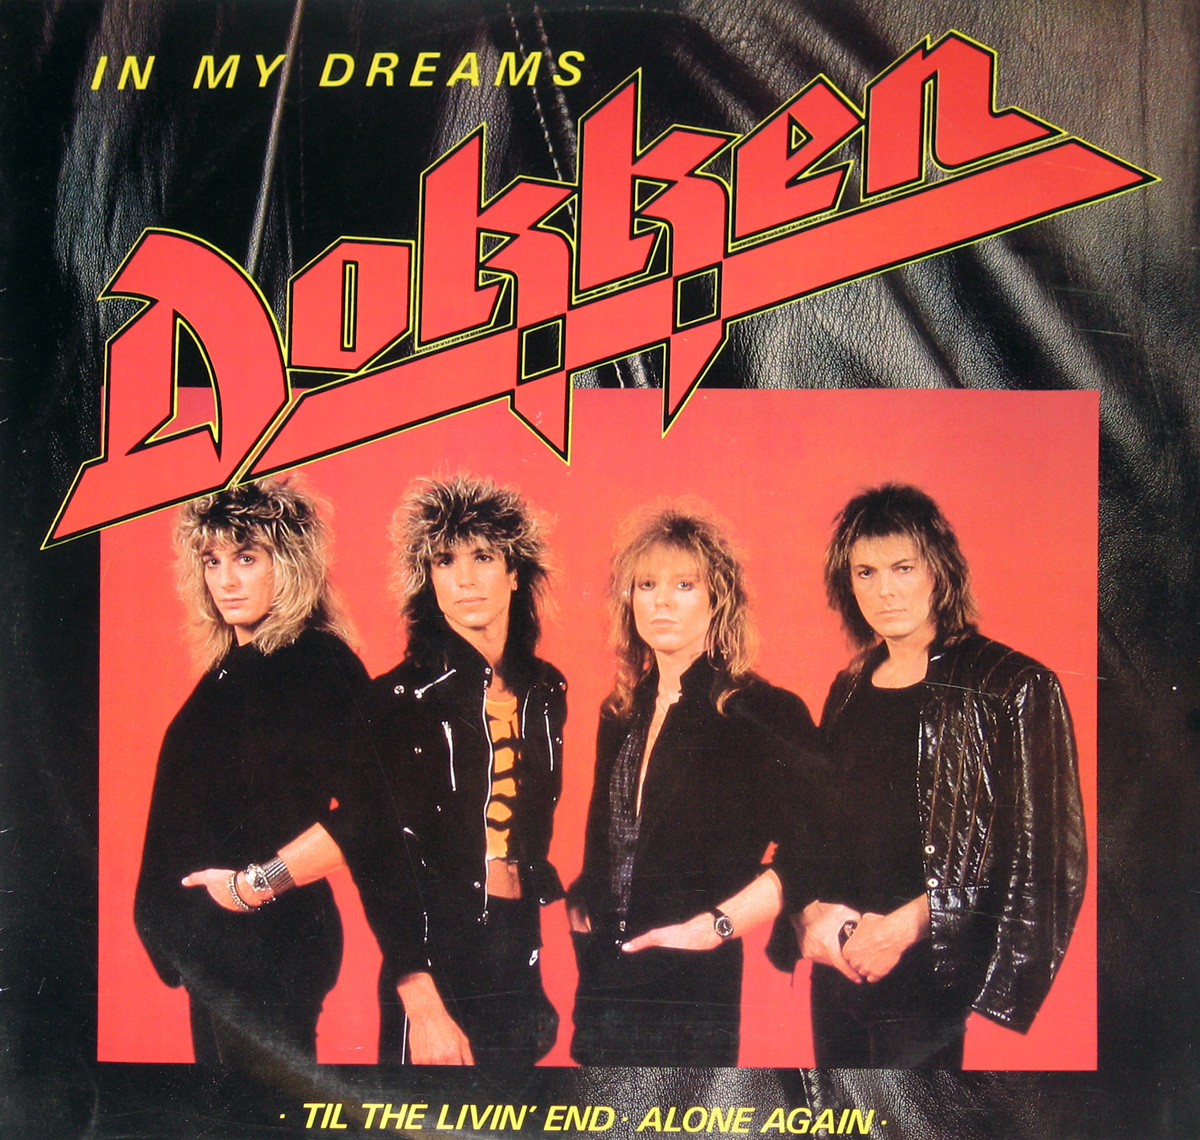 Large Hires Photo of DOKKEN in my Dreams